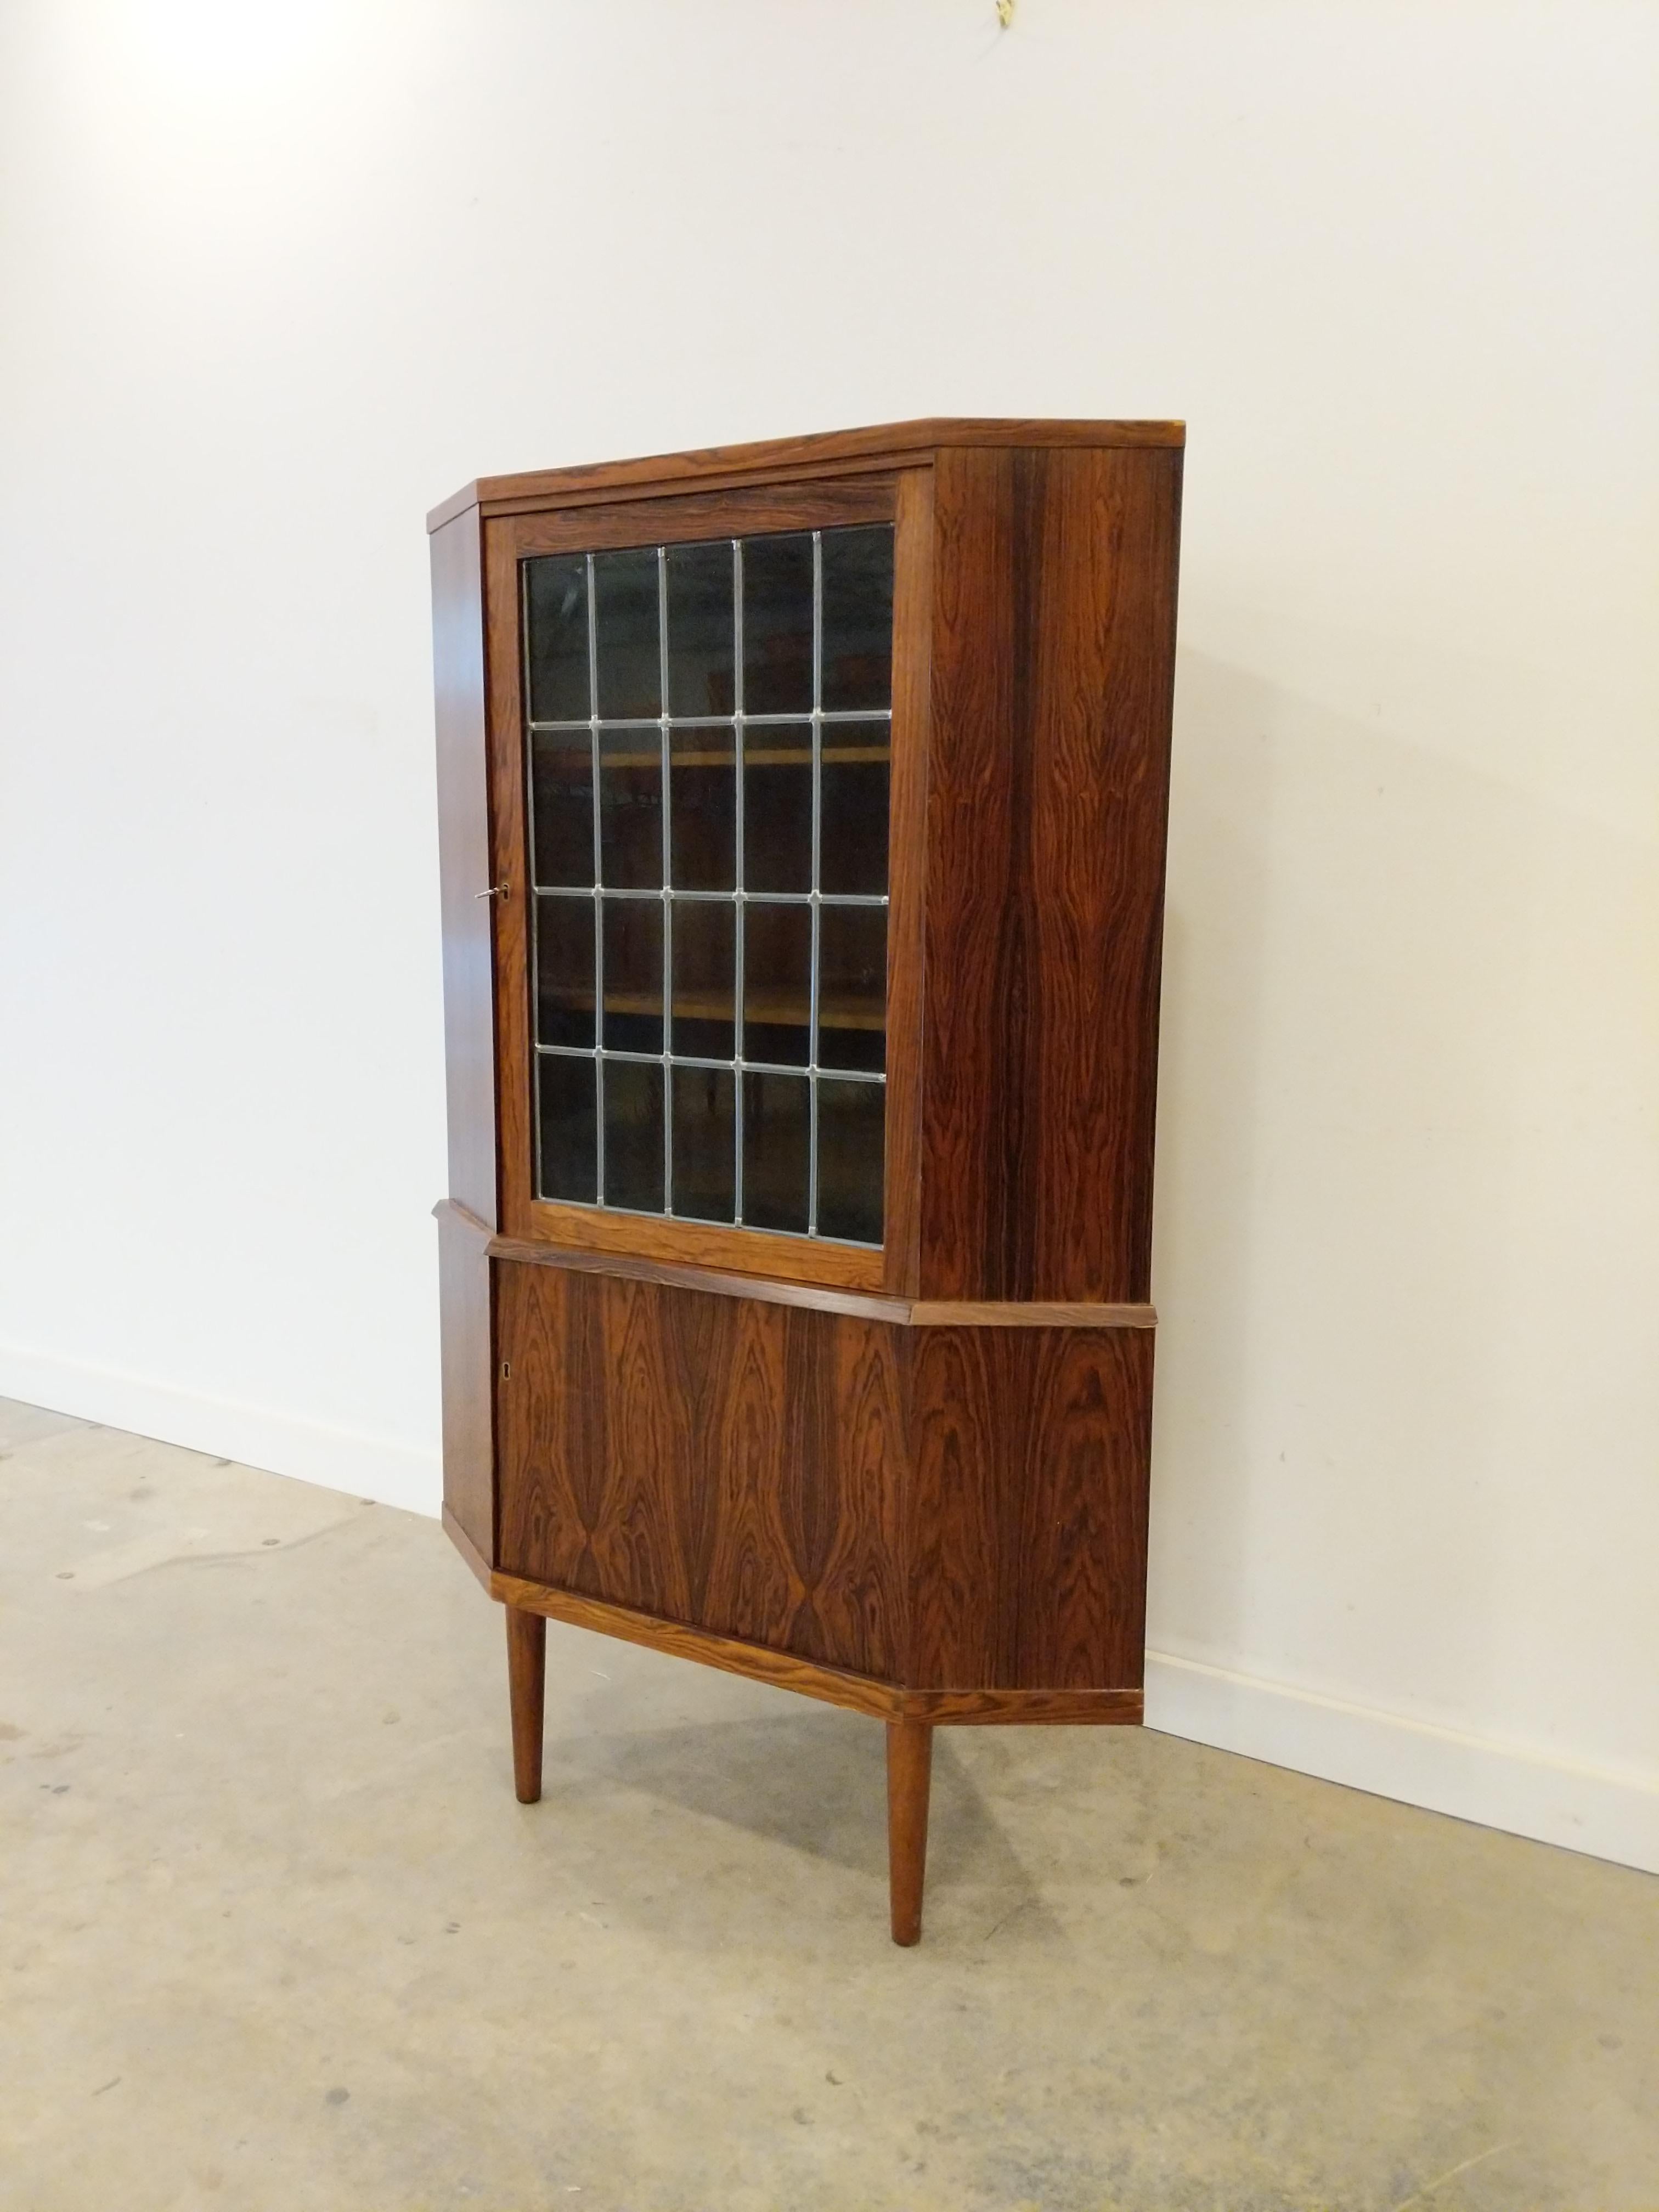 Authentic vintage mid century Danish / Scandinavian Modern rosewood corner cabinet / bar cabinet / dry bar.

This piece will be refinished before delivery. We are typically able to have items ready for delivery within 7-10 days, depending on our